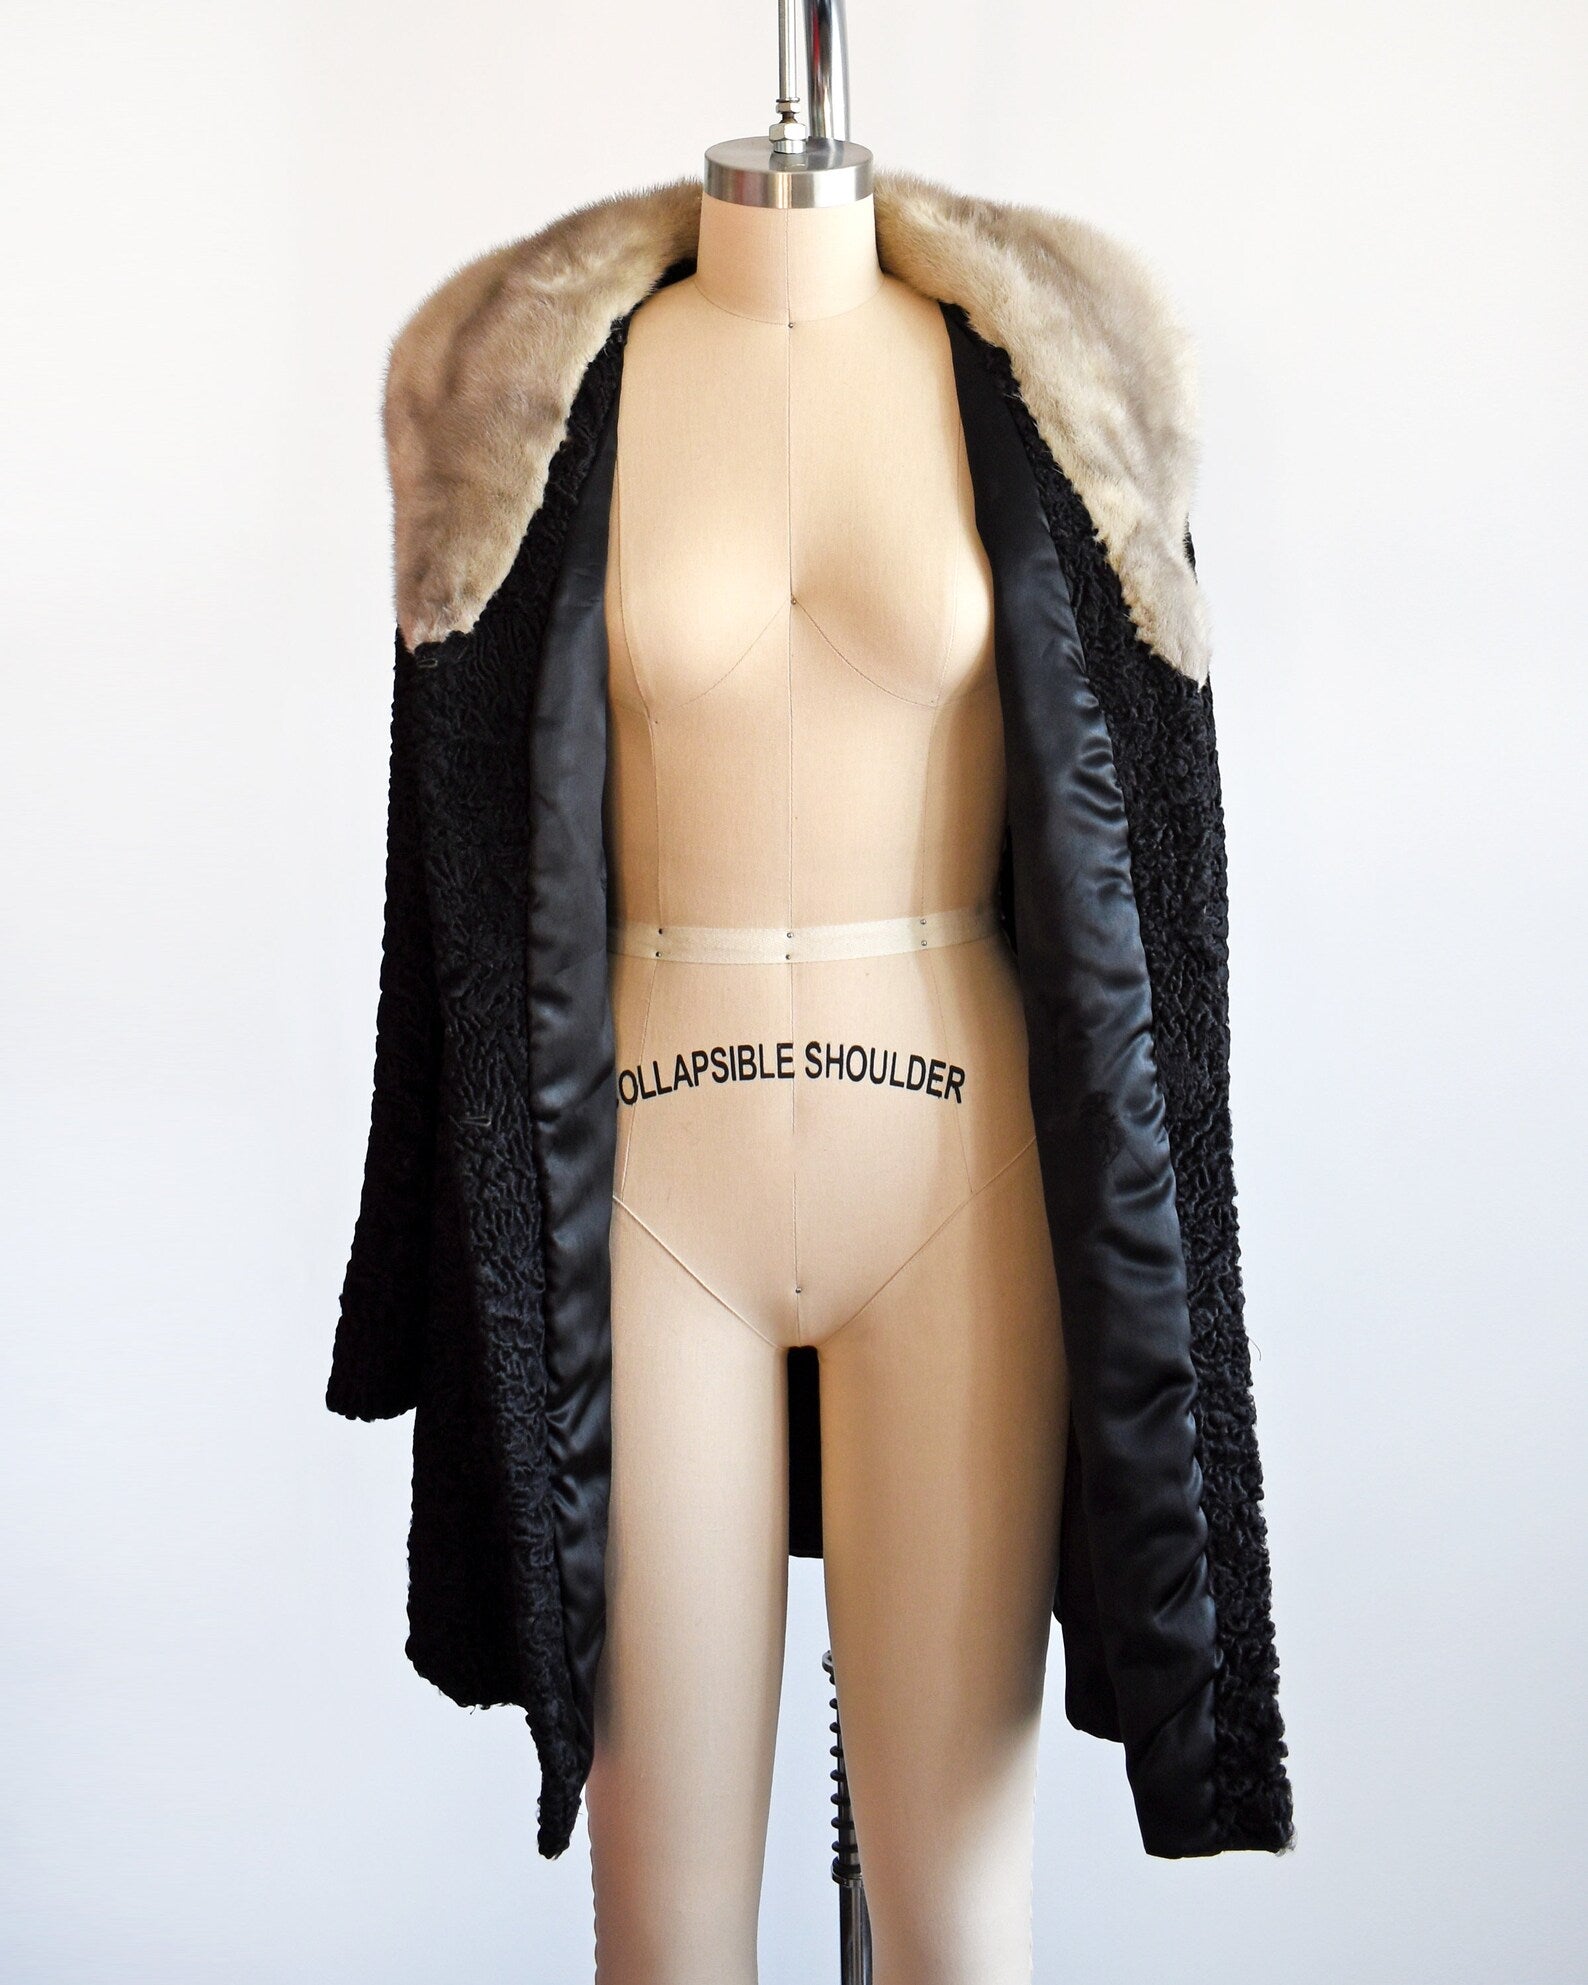 A vintage late 50s early 60s black curly Persian lamb coat that has a silver gray mink fur collar. Two hidden hook and eye closures down the front. Coat is on a dress form and is open showing the black lining